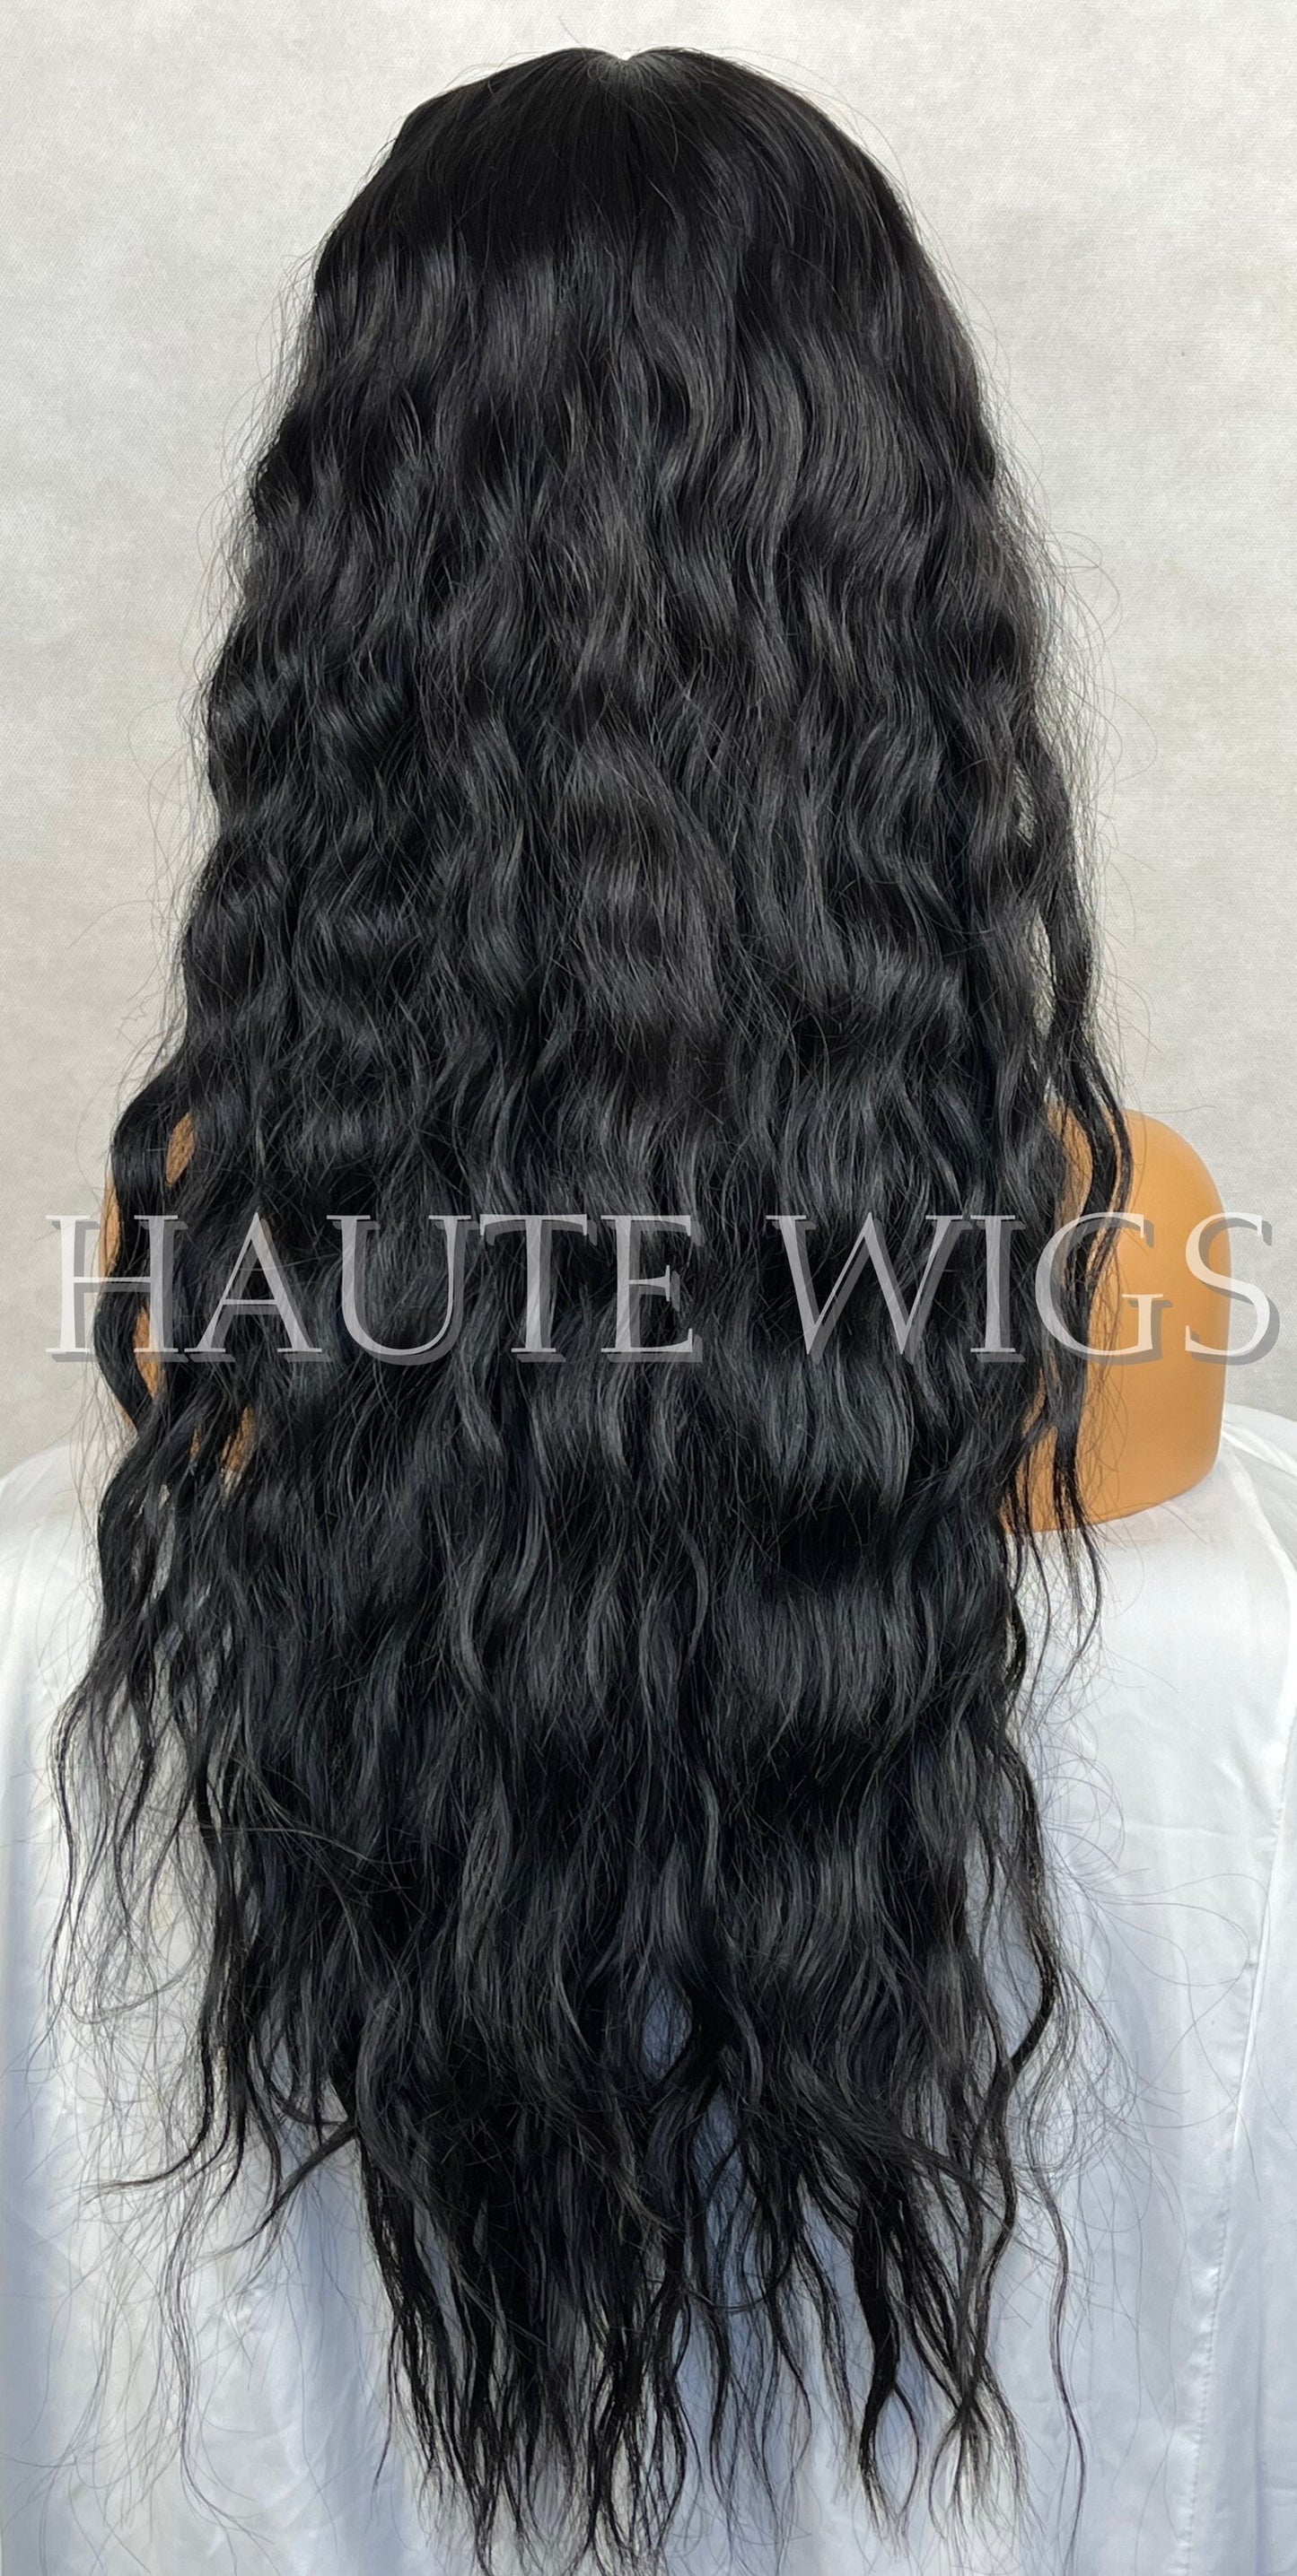 28 Inch Jet Black Curly Wavy Water Waves Wig Lace Front Perm Human Hair Blends Gift For Her Realistic Ladies Womens Wig